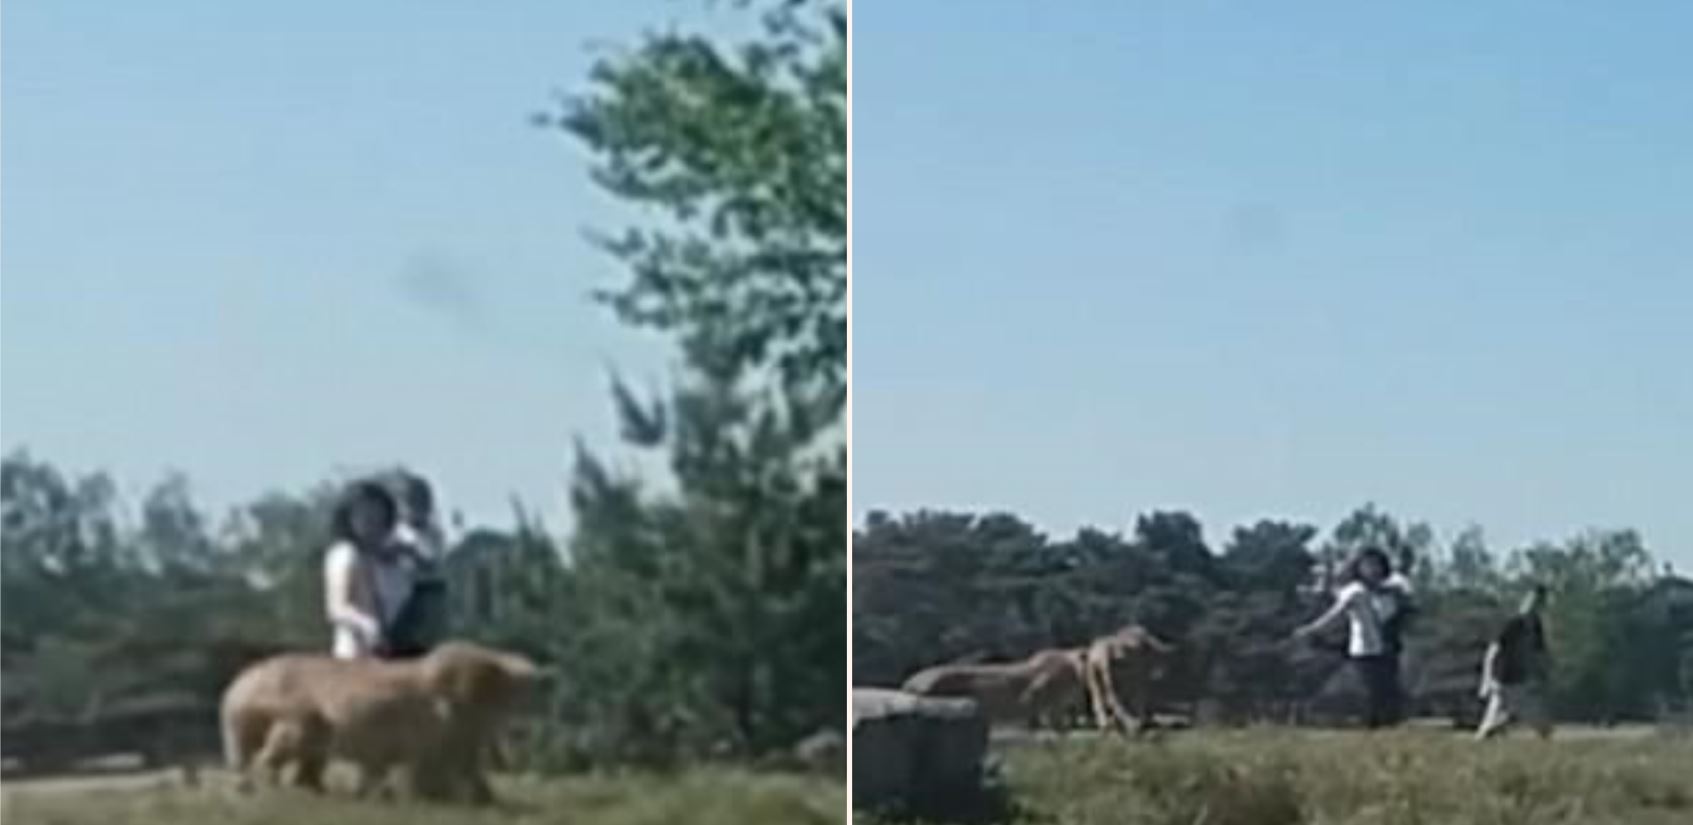 Family tries to outrun cheetahs after getting out of car in Safari park